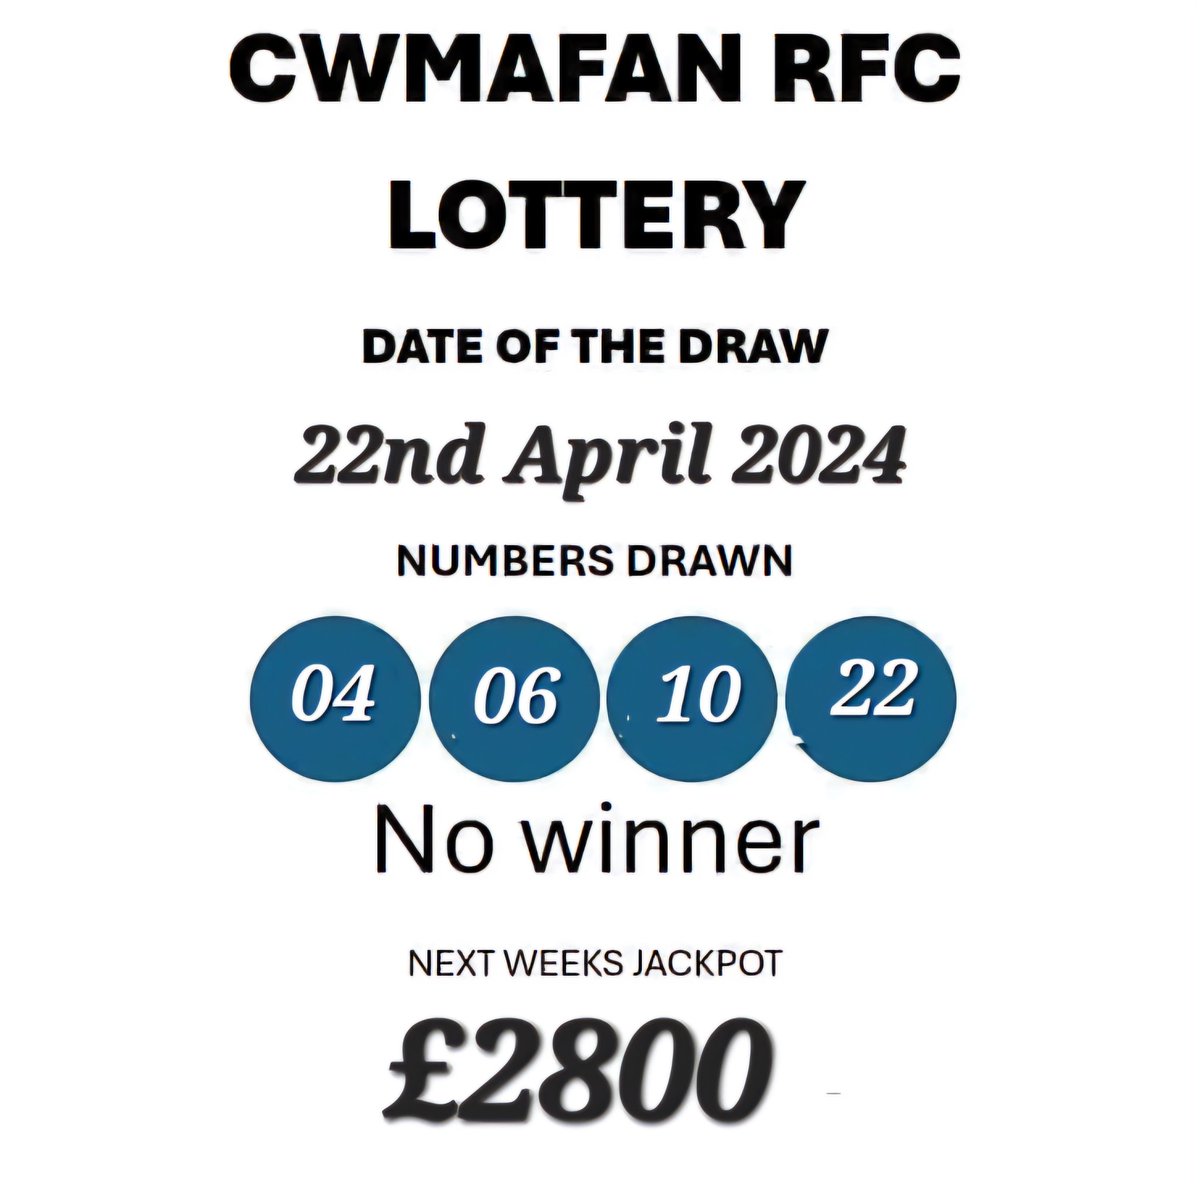 This weeks Lotto numbers, there were no winners so next week's Jackpot is £2800